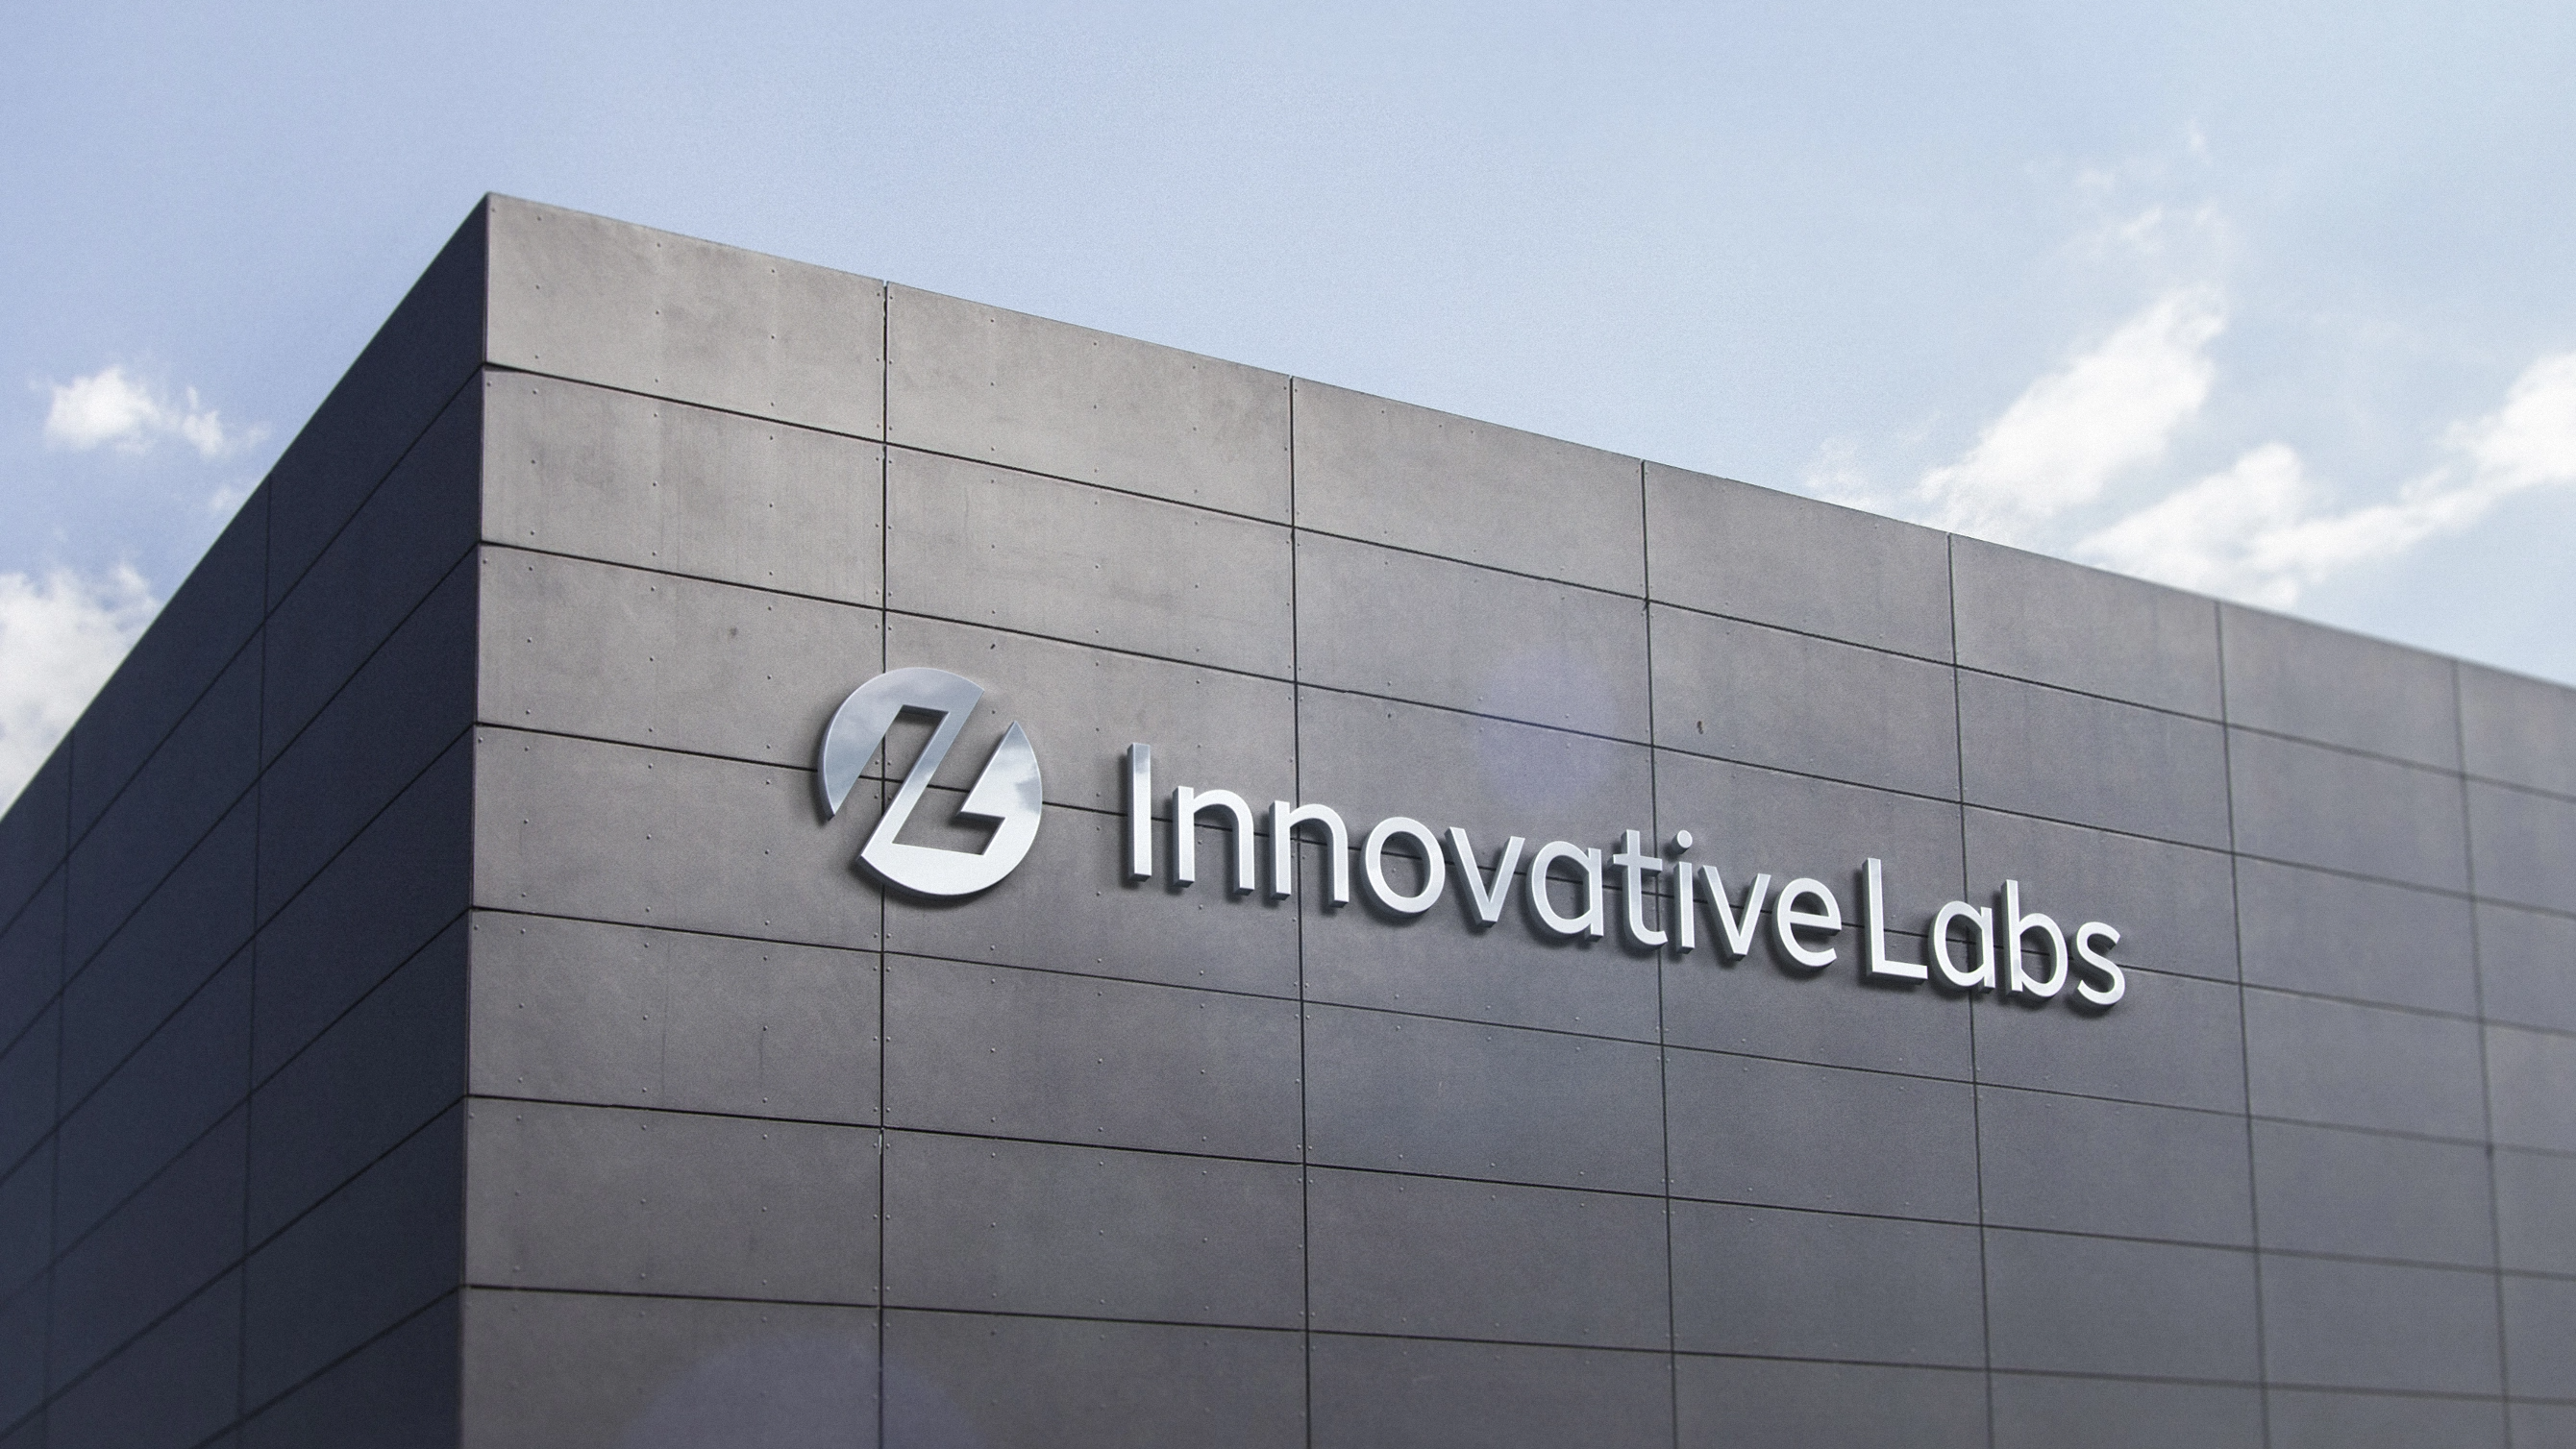 Exterior of Innovative Labs building feature image